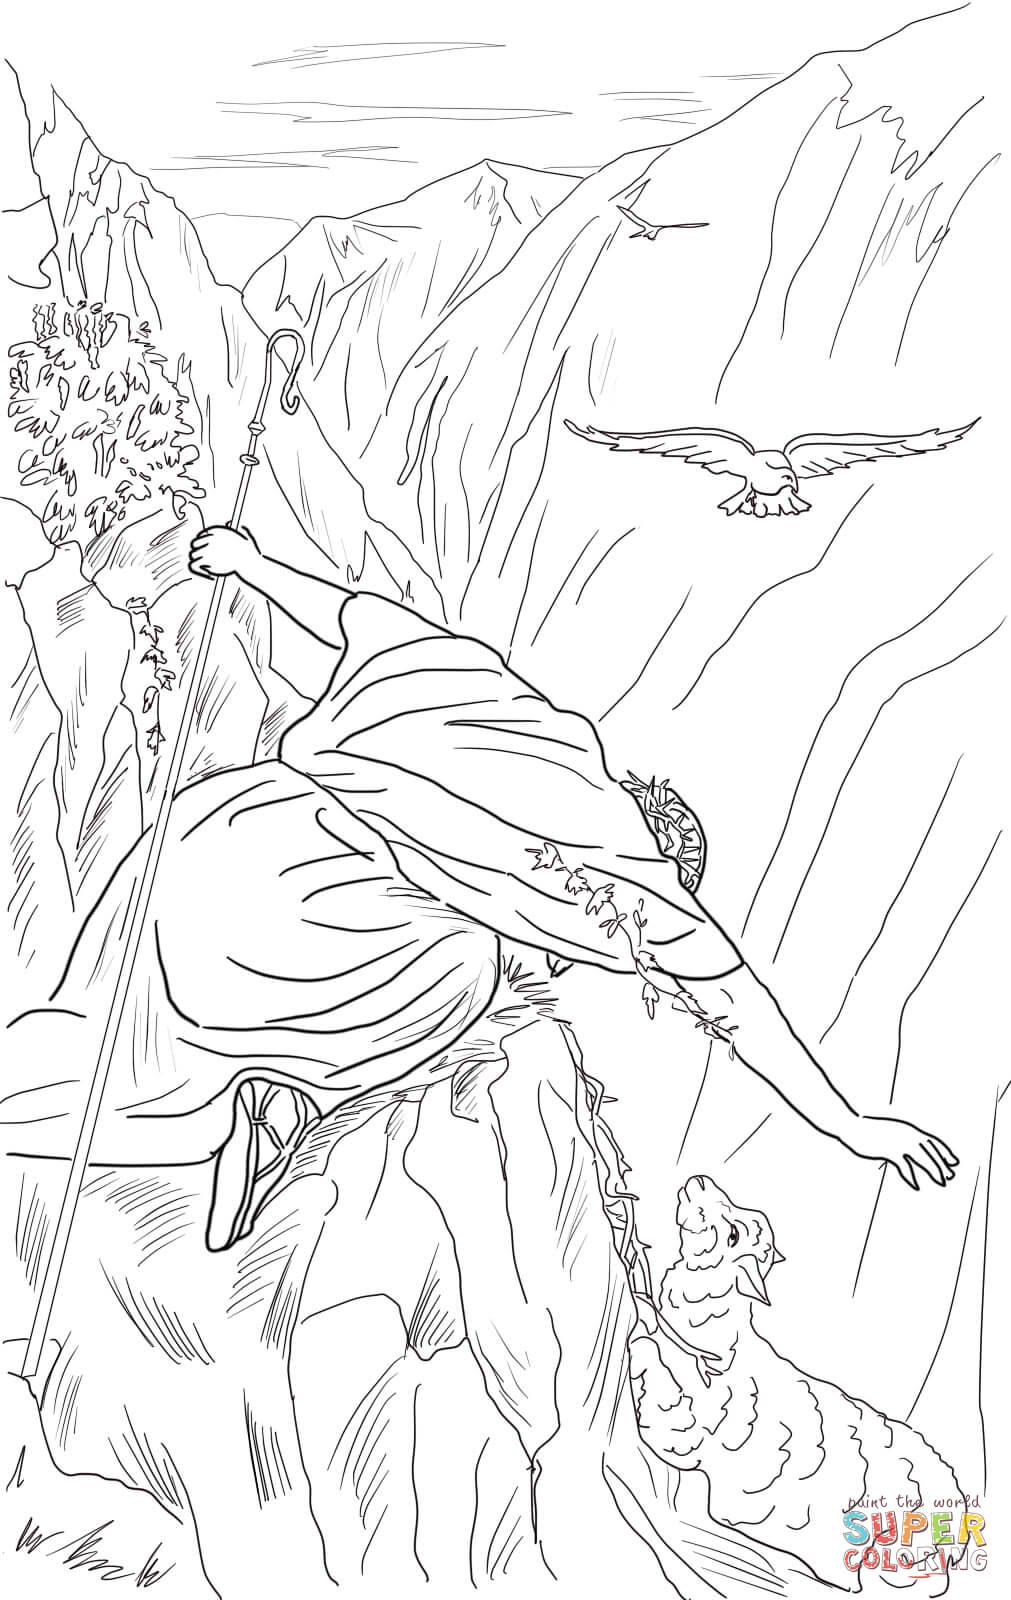 Coloring Pages Sheep And The Shepherd The Lost Sheep Coloring Page Free Printable Coloring Pages